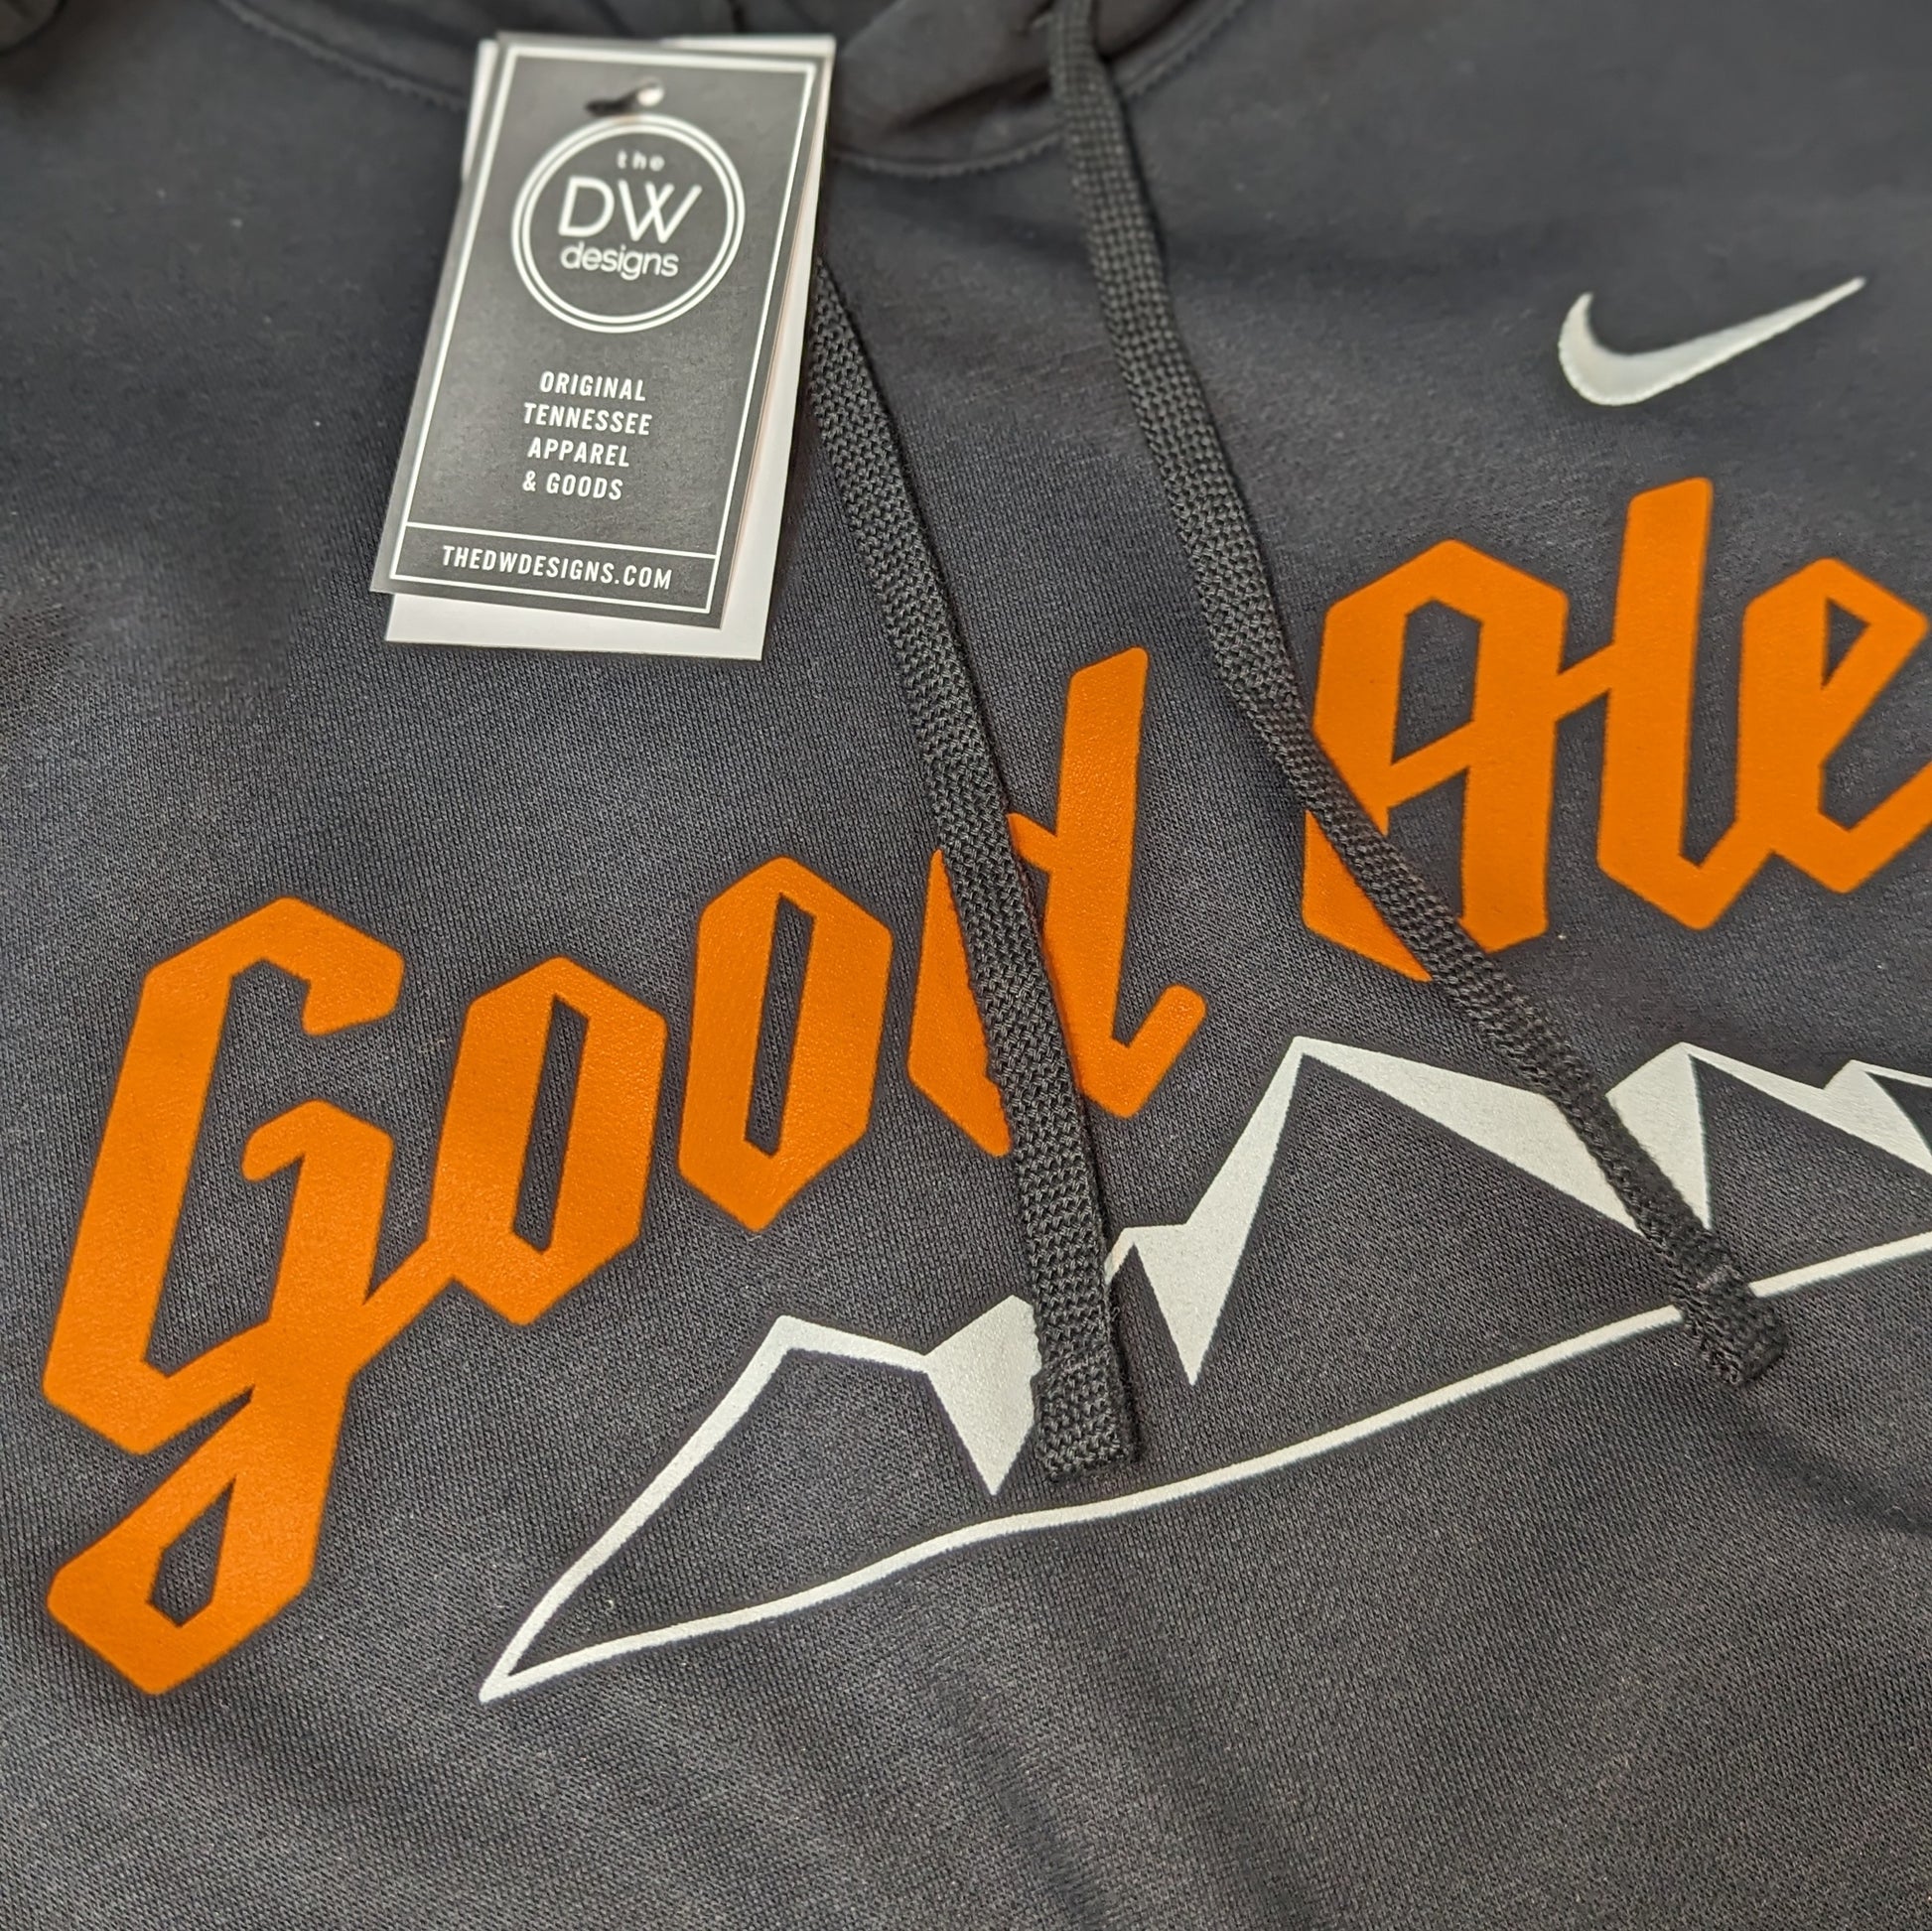 The Nike Good Ole 4.0 Hoodie features the words good ole above mountains. Sold by The DW Designs, Knoxville, TN.